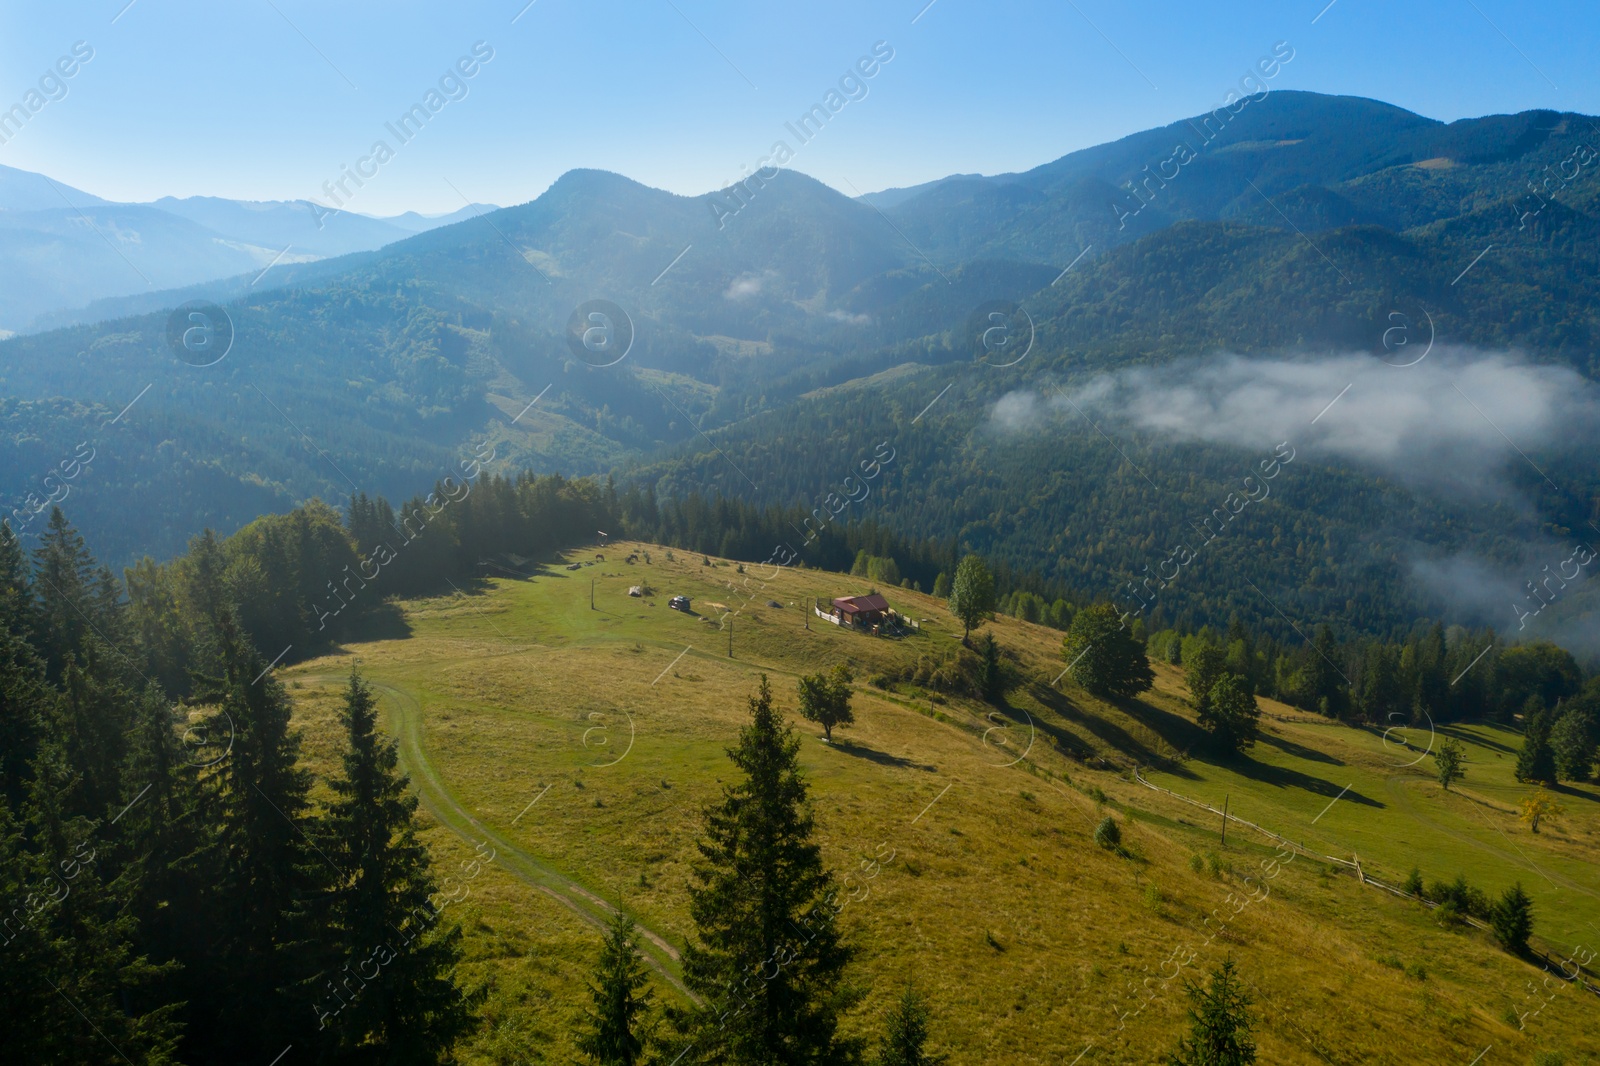 Image of Aerial view of beautiful landscape with misty forest and village in mountains